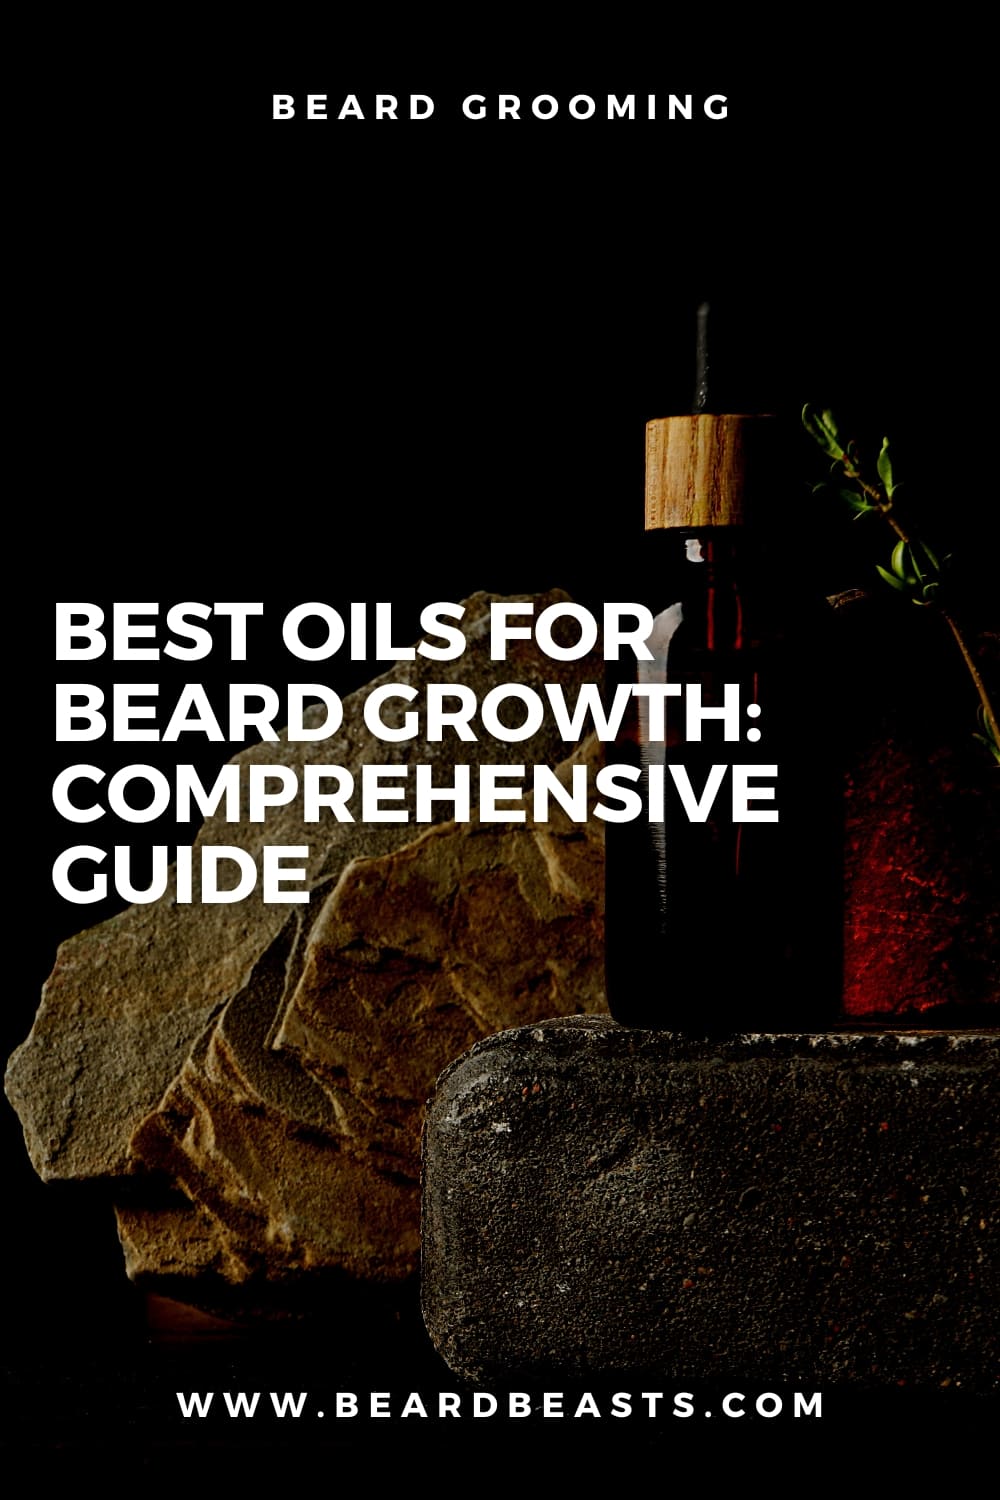 Pinterest pin for a beard grooming guide featuring a dark bottle of beard oil with a dropper, fresh herbs, and rocks, promoting 'Best Oils for Beard Growth: Comprehensive Guide' on beardbeasts.com.